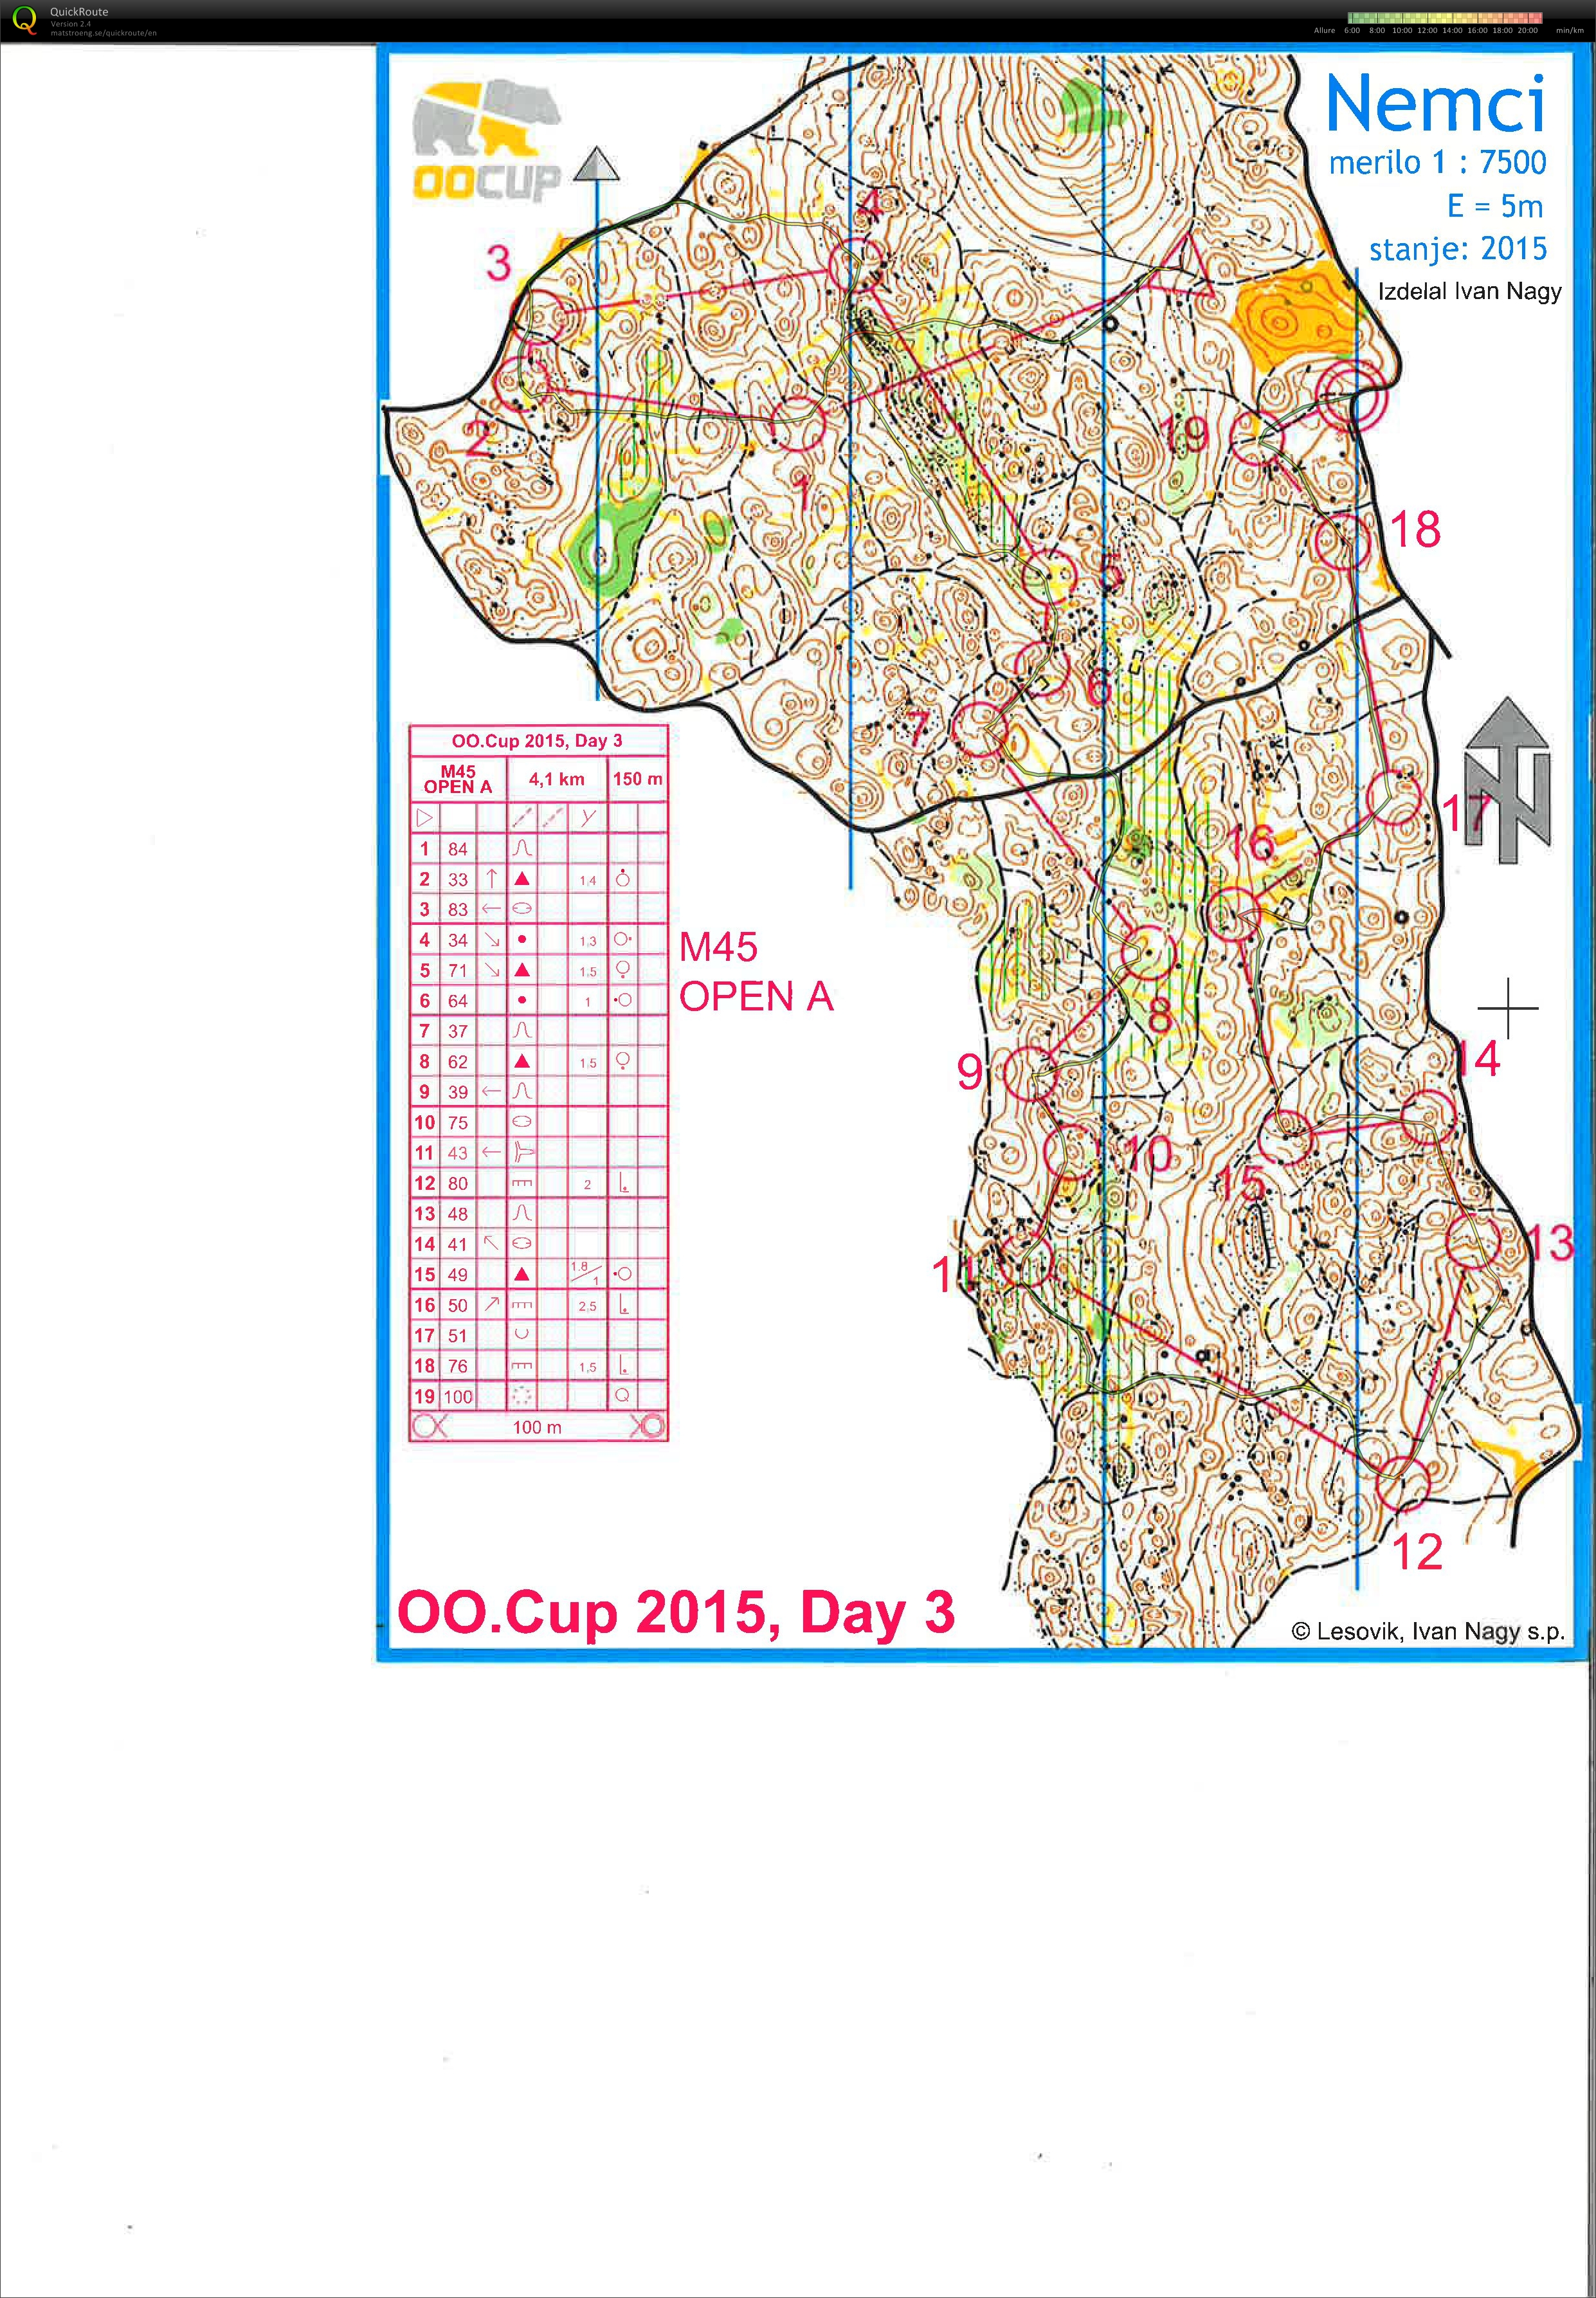 OOCup-Day3 (2015-07-27)